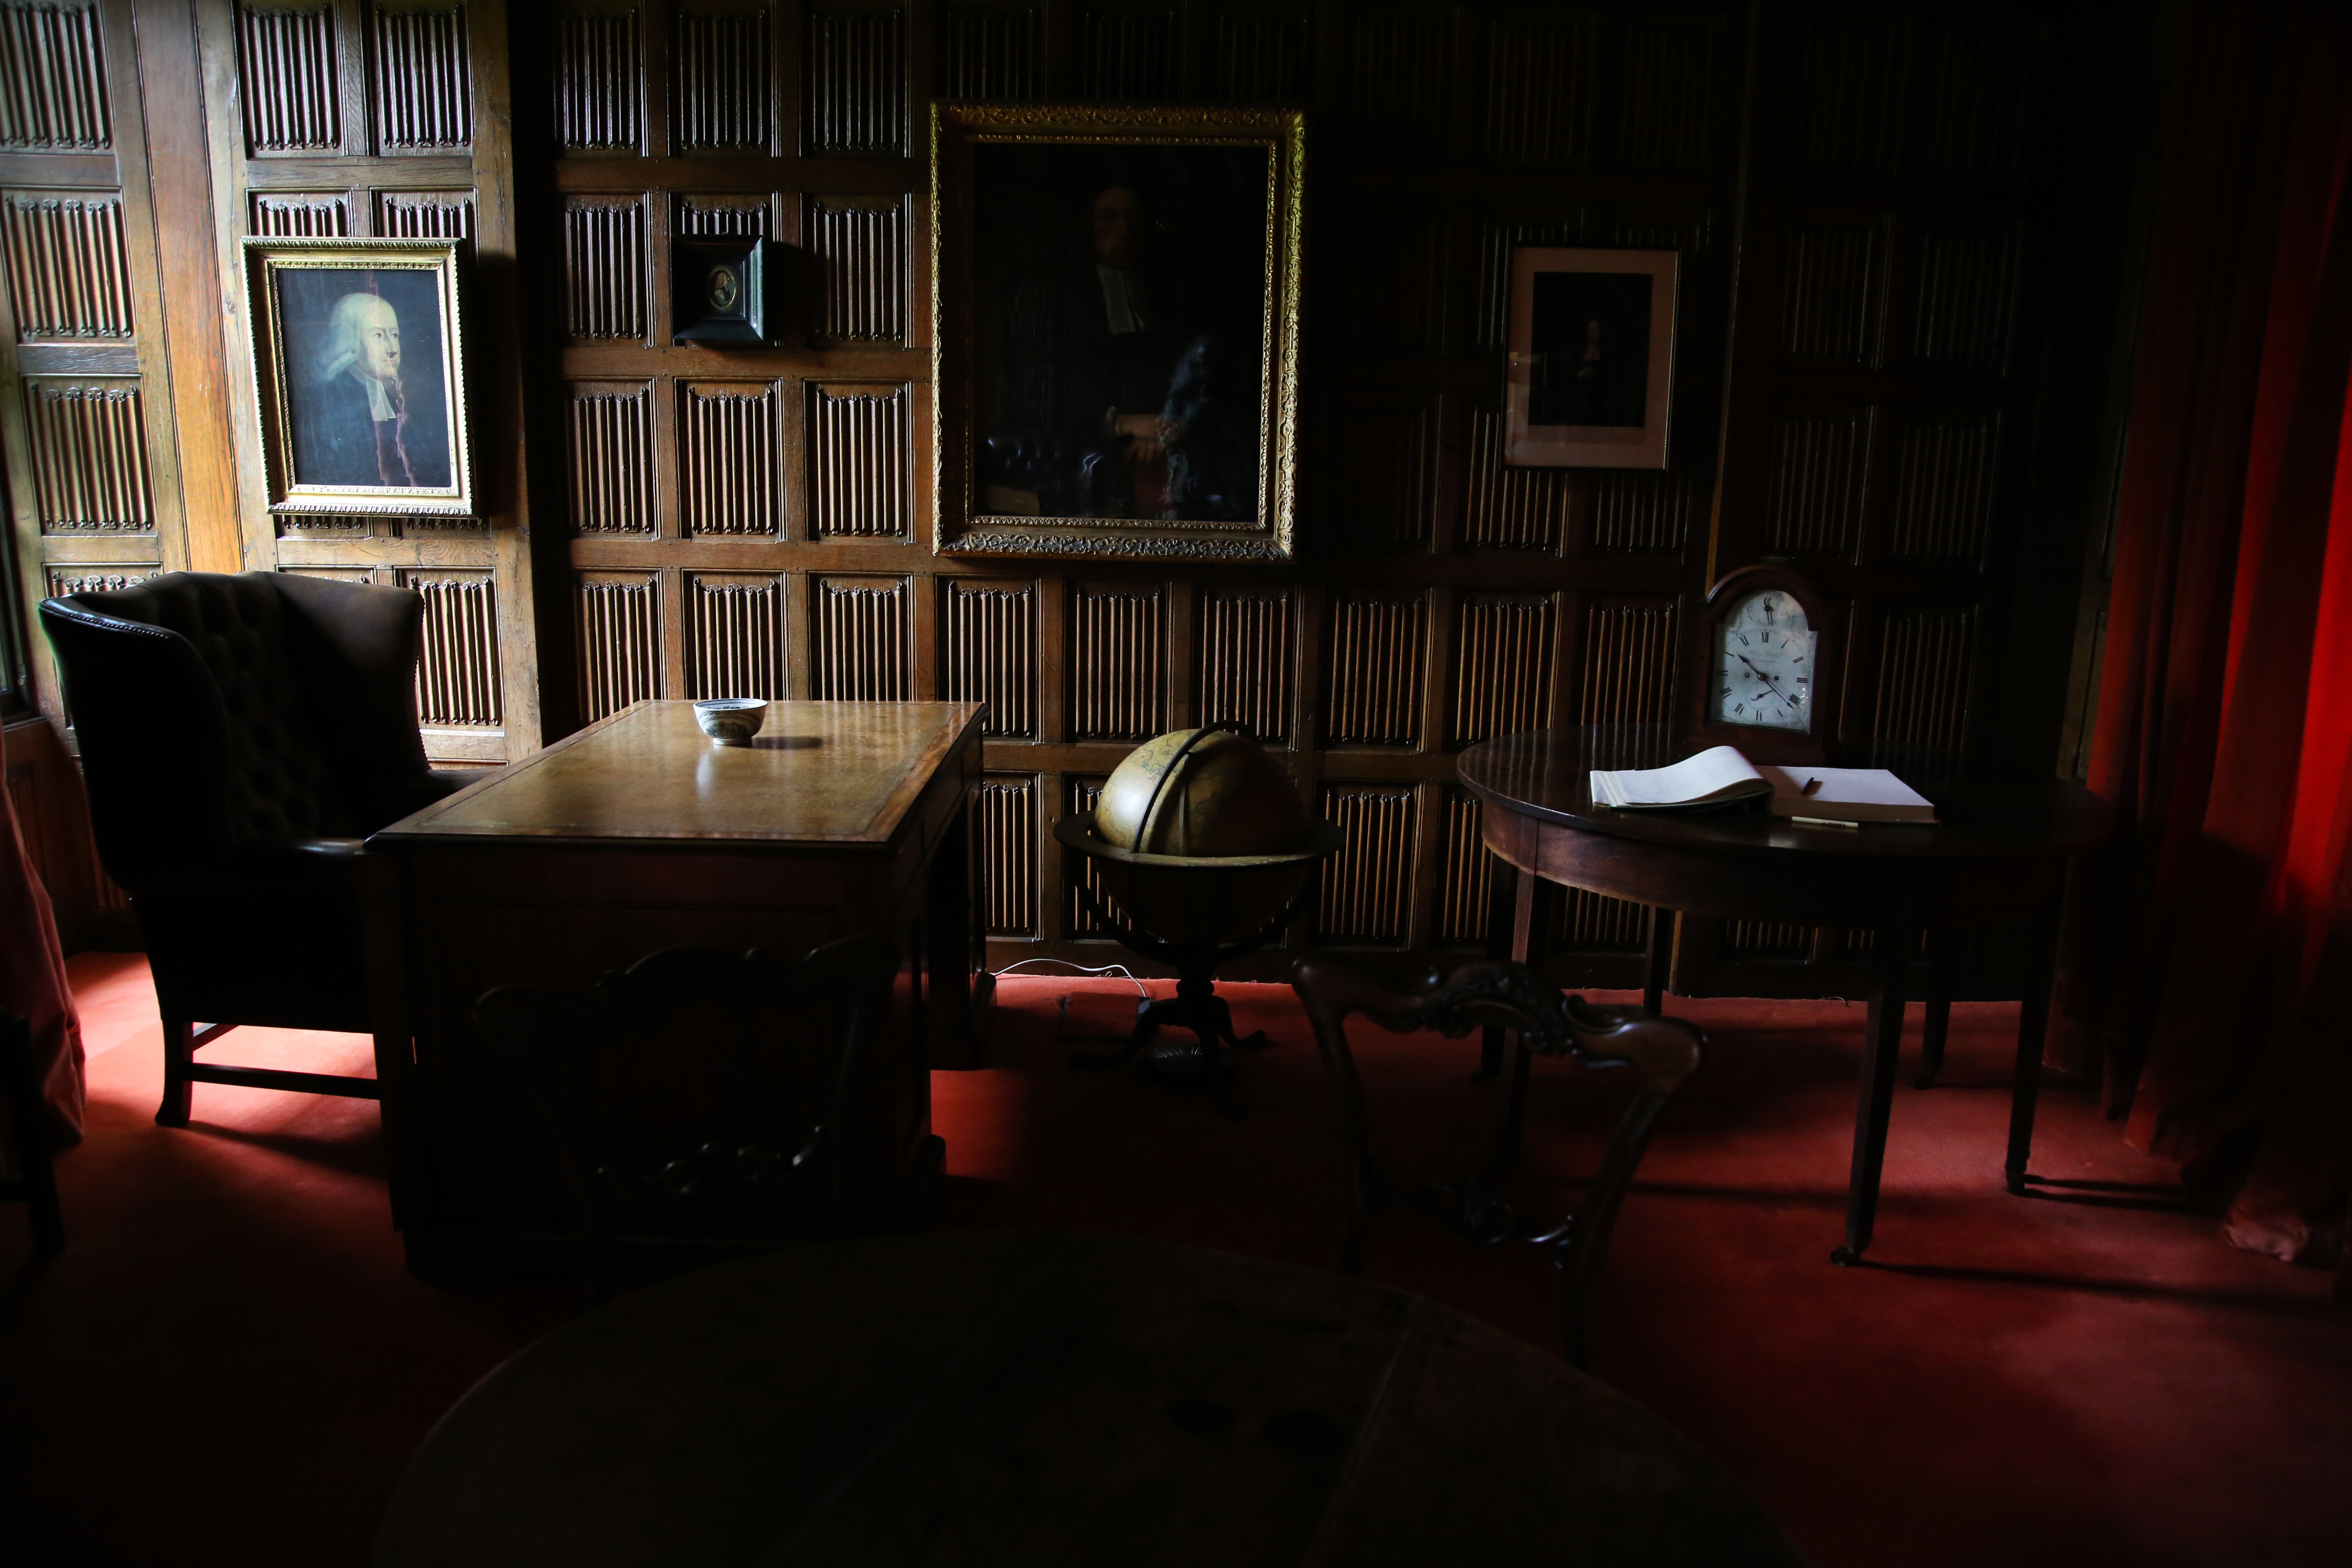 A room at Lincoln College, Oxford, is decorated as John Wesley would have had it. Wesley served as a fellow at Lincoln College from 1726 until his marriage in 1751. Photo by Kathleen Barry, United Methodist Communications